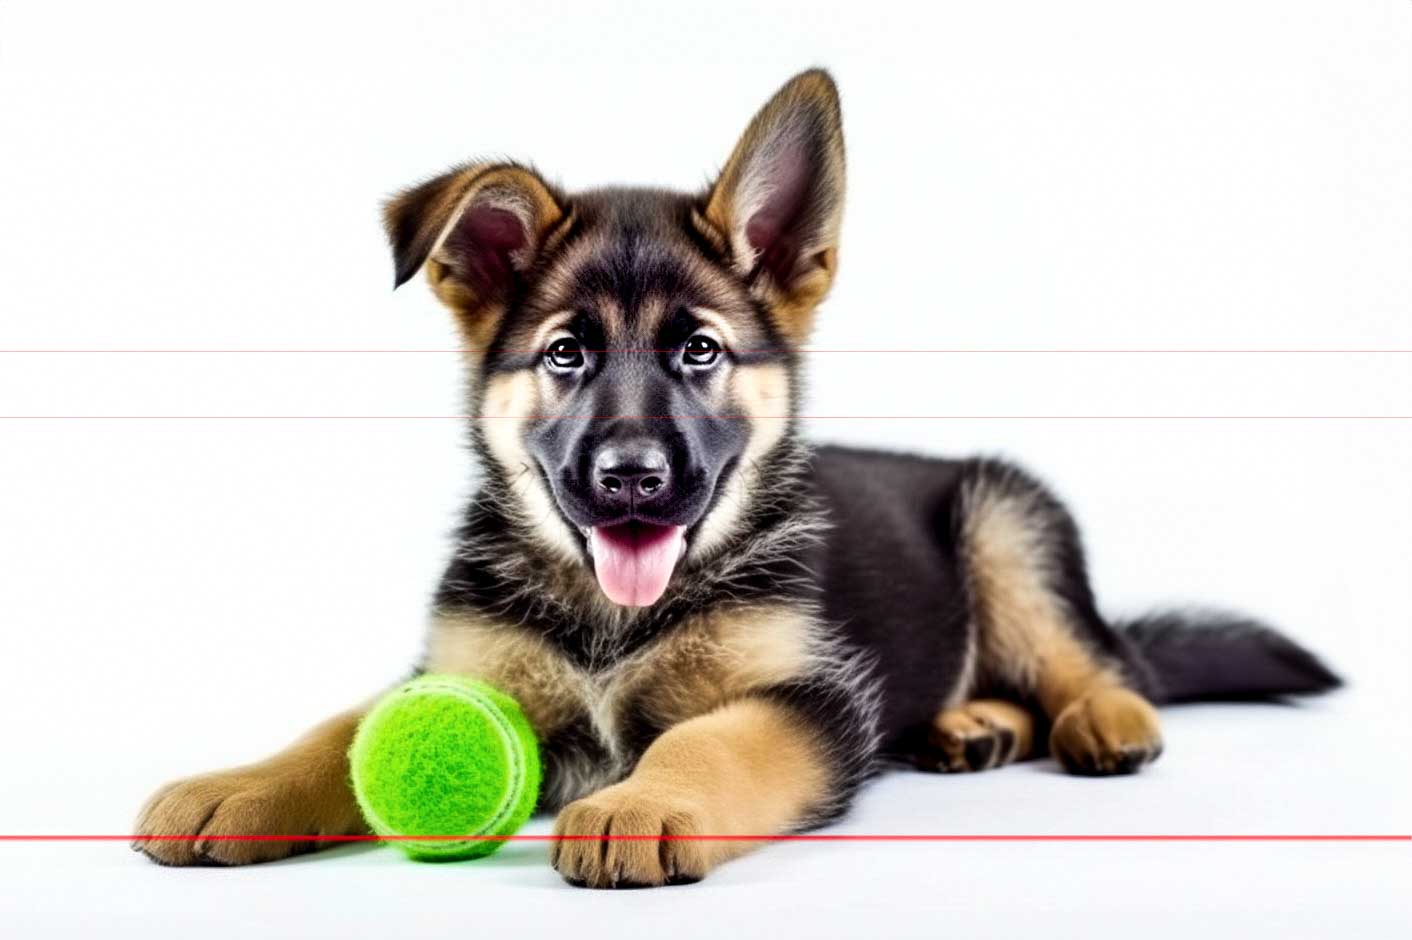 This picture captures a playful German Shepherd puppy laying on a white background with its front paws stretched out, its mouth open, and tongue sticking out. One of its ears flops down while the other stands upright. In front of the puppy rests a bright green tennis ball. The puppy looks cheerful and attentive.